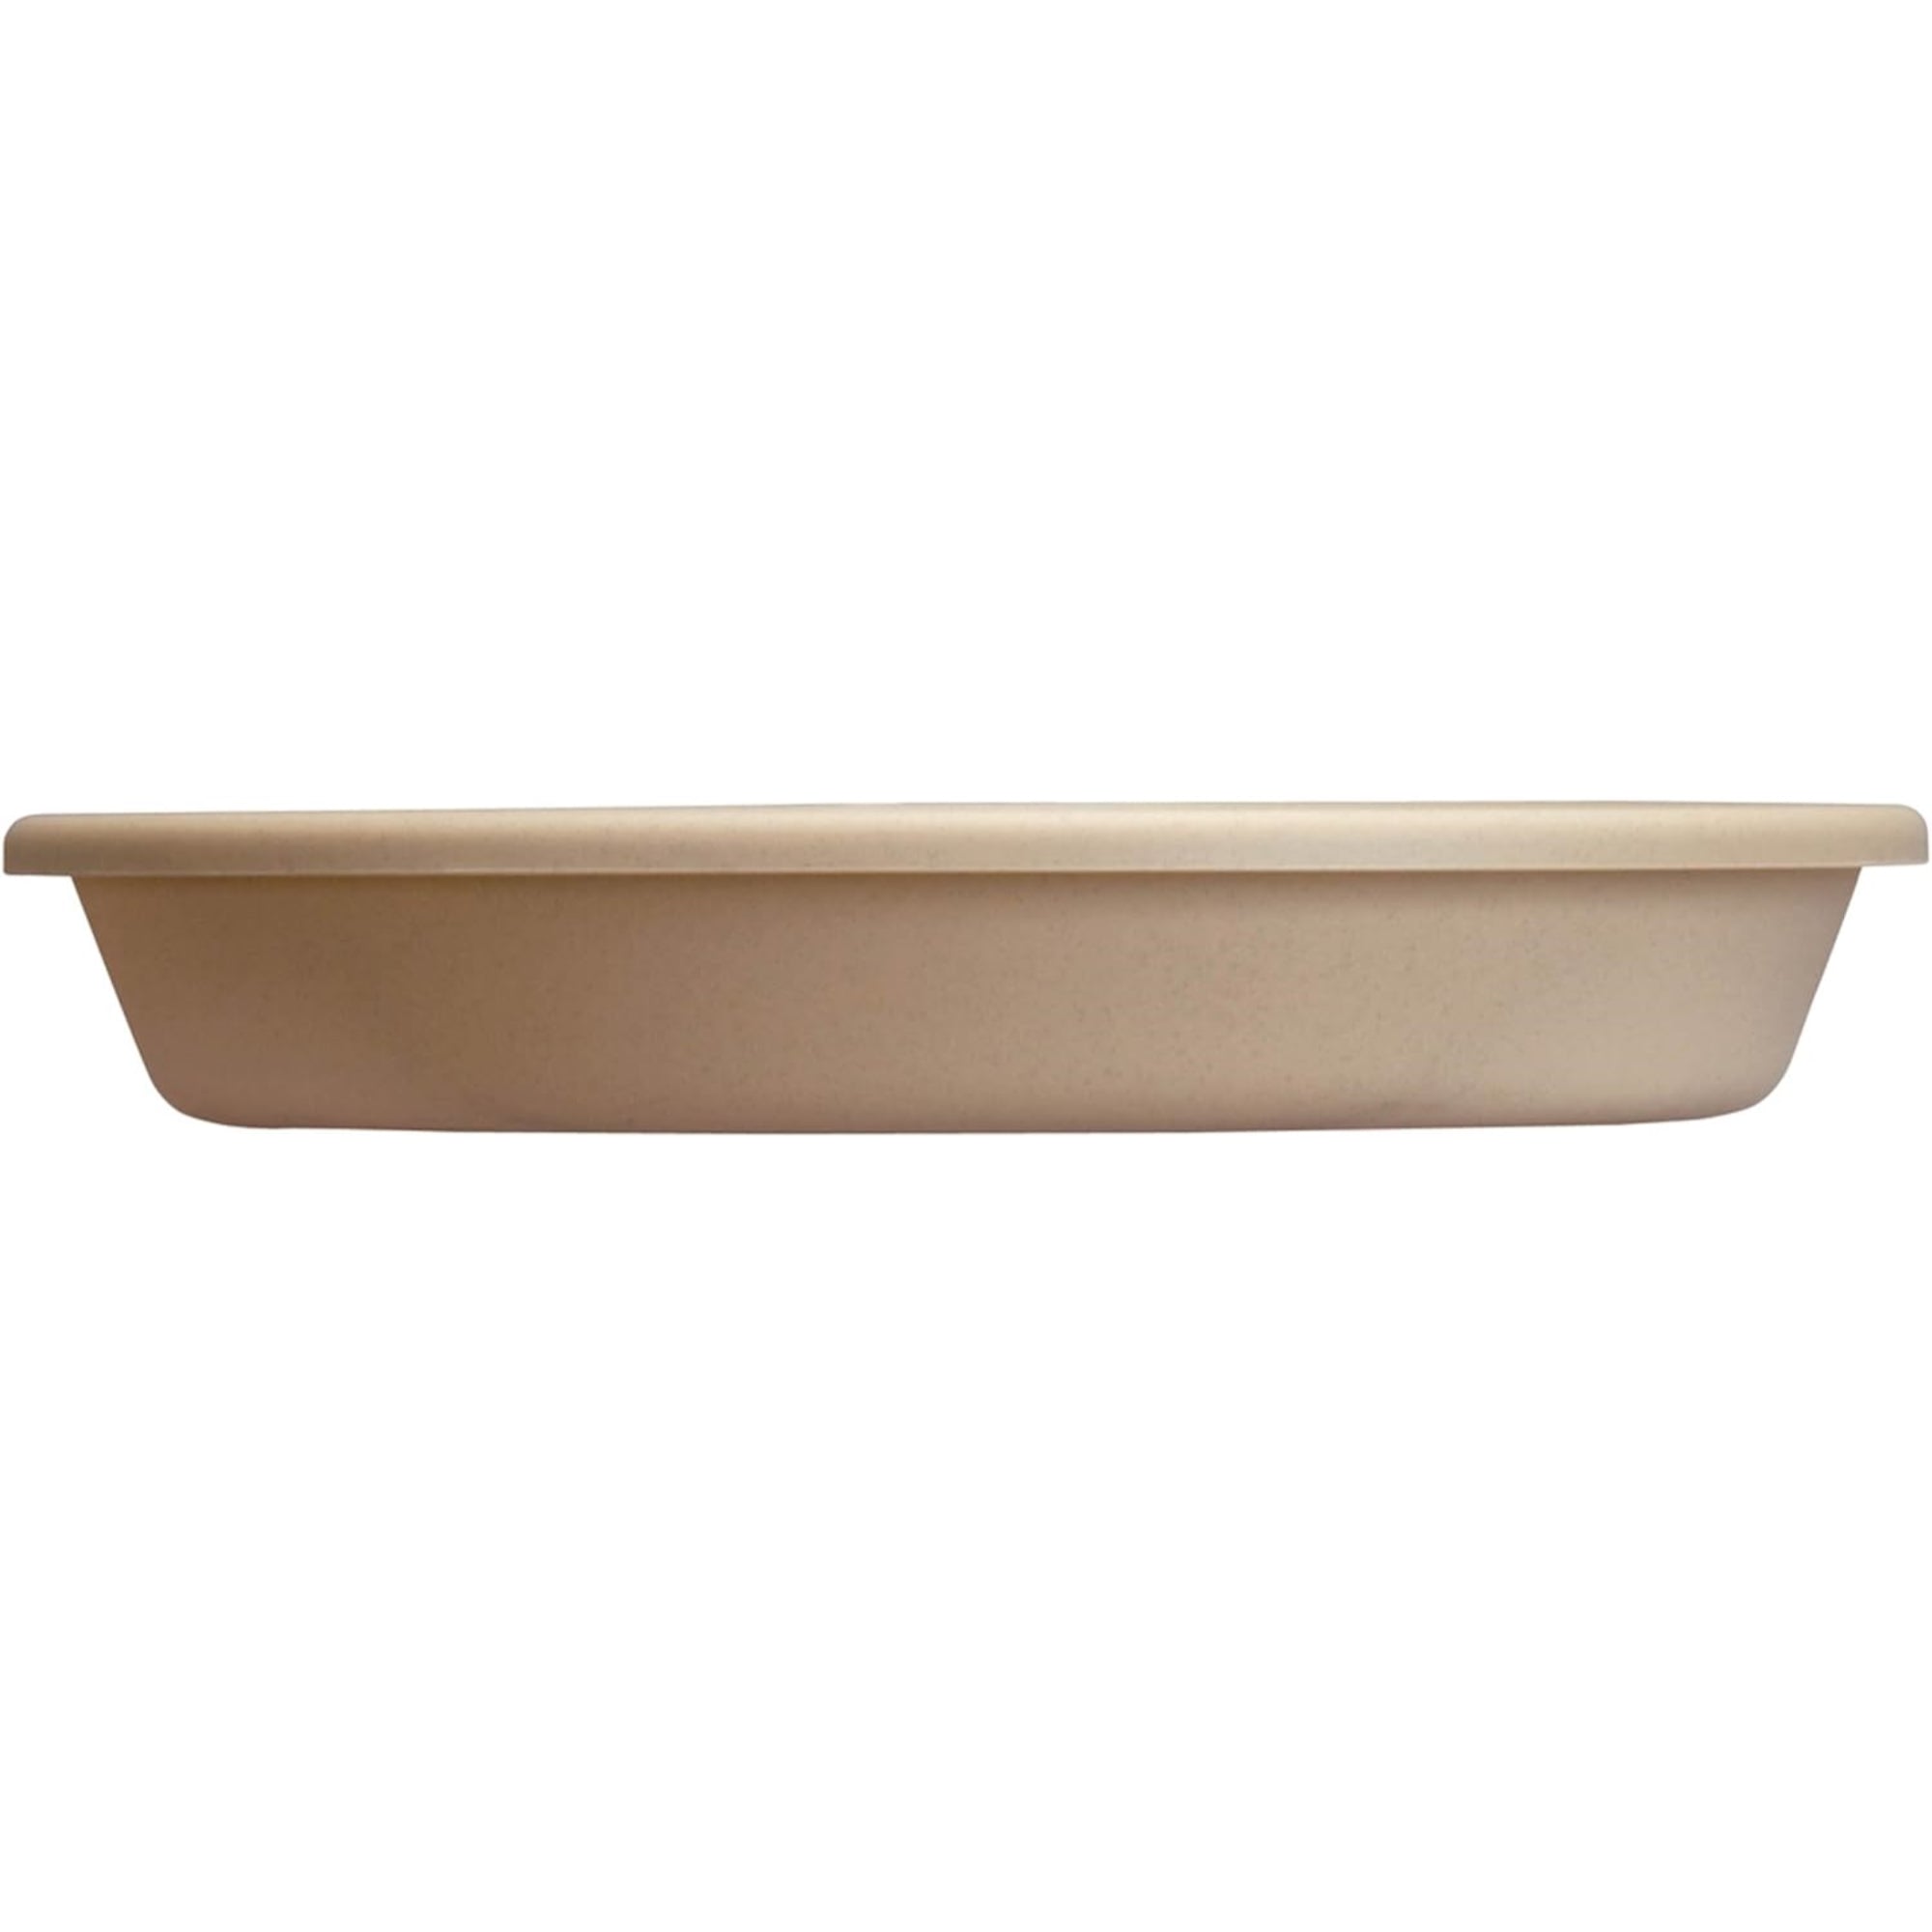 Akro-Mils Classic Saucer for 17-Inch Classic Pot, Sandstone, 16in